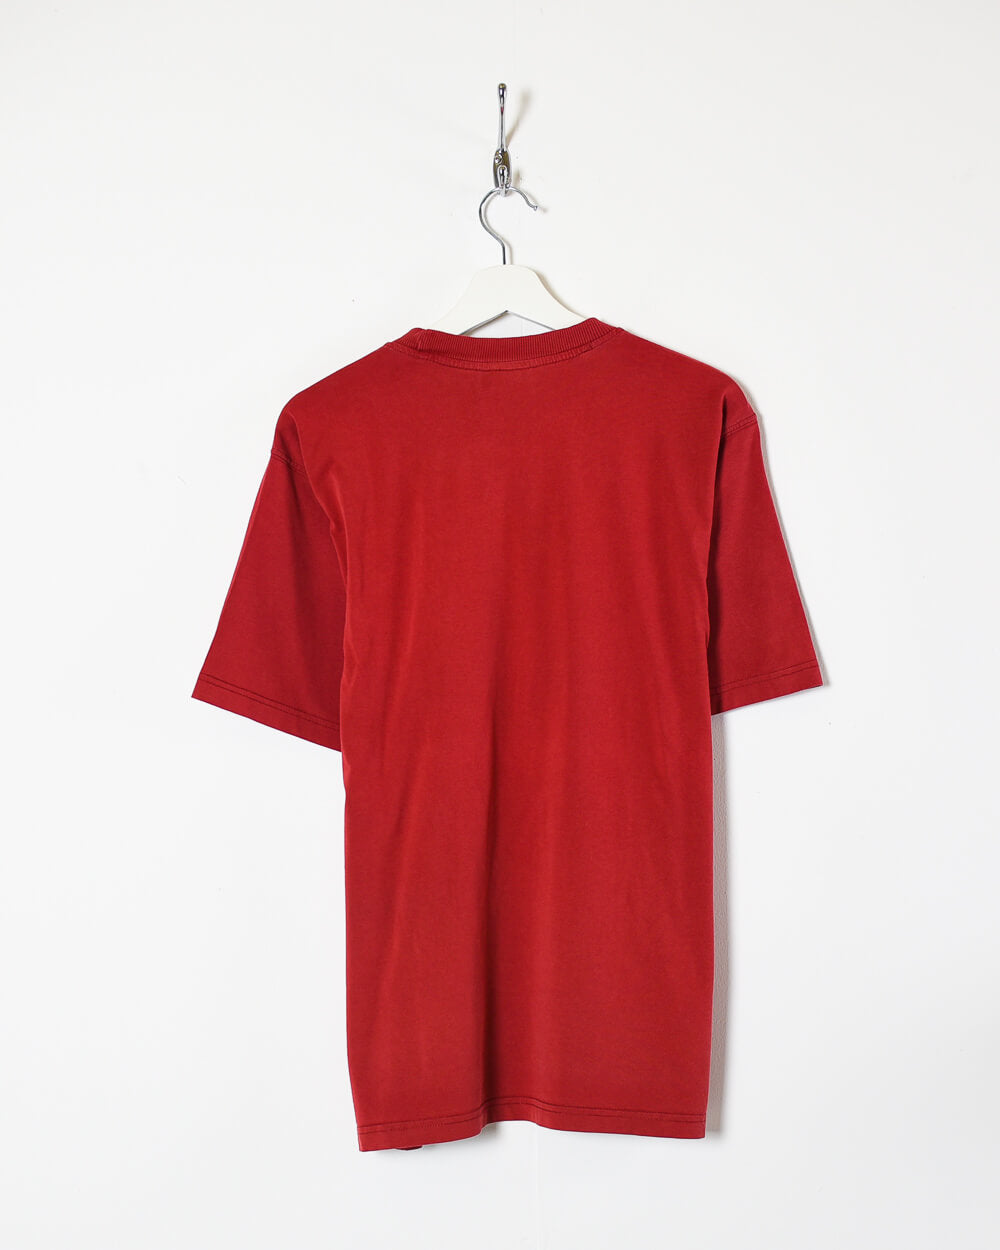 Red Adidas T-Shirt - X-Large